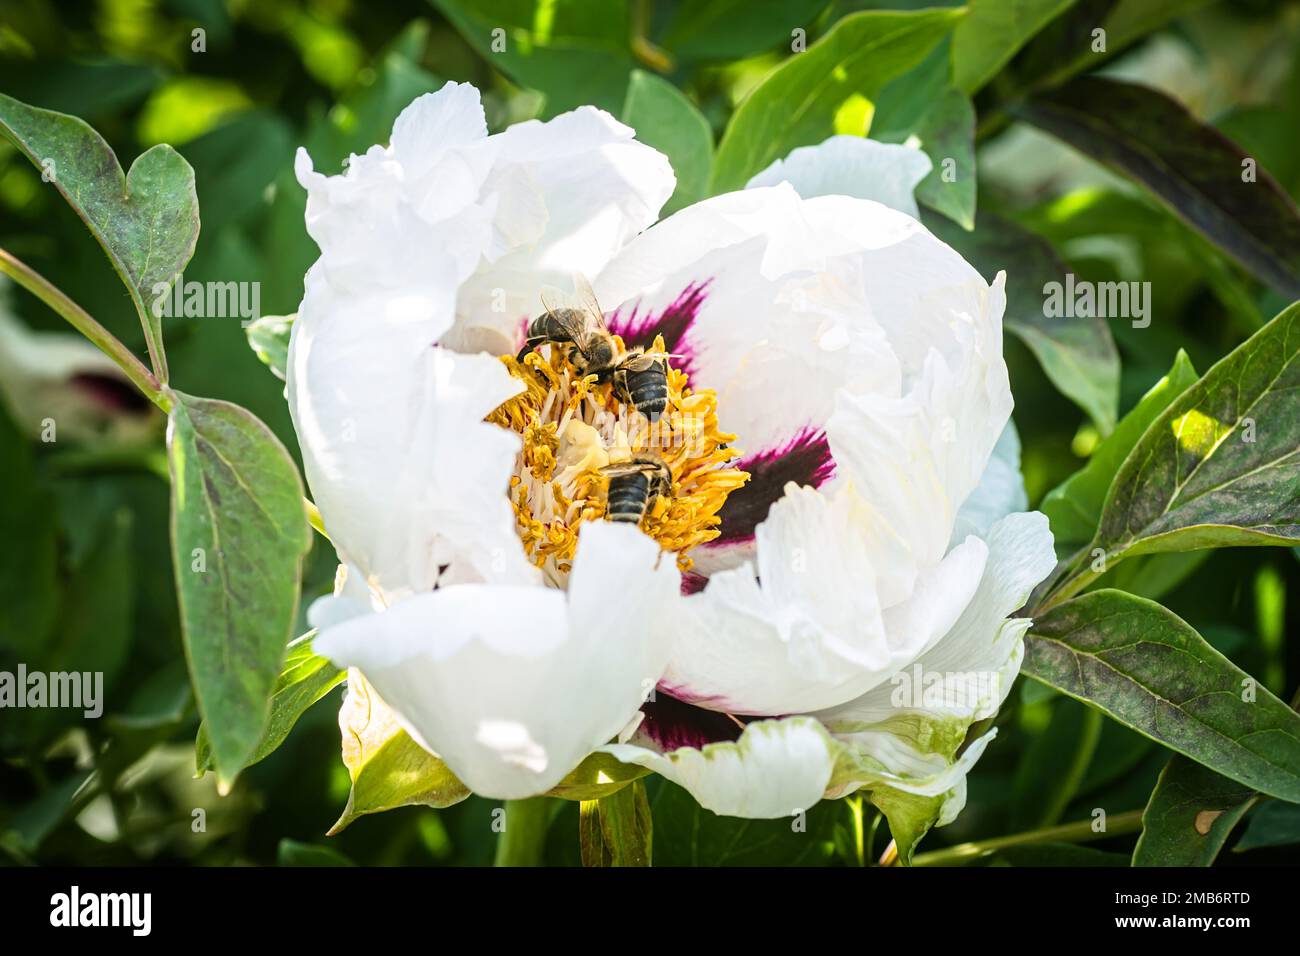 White peony, pion flower close up detail. Honey bee with curd on stained peon stamens. Bees collect pollen from Paeonia suffruticosa, tree peony or Stock Photo